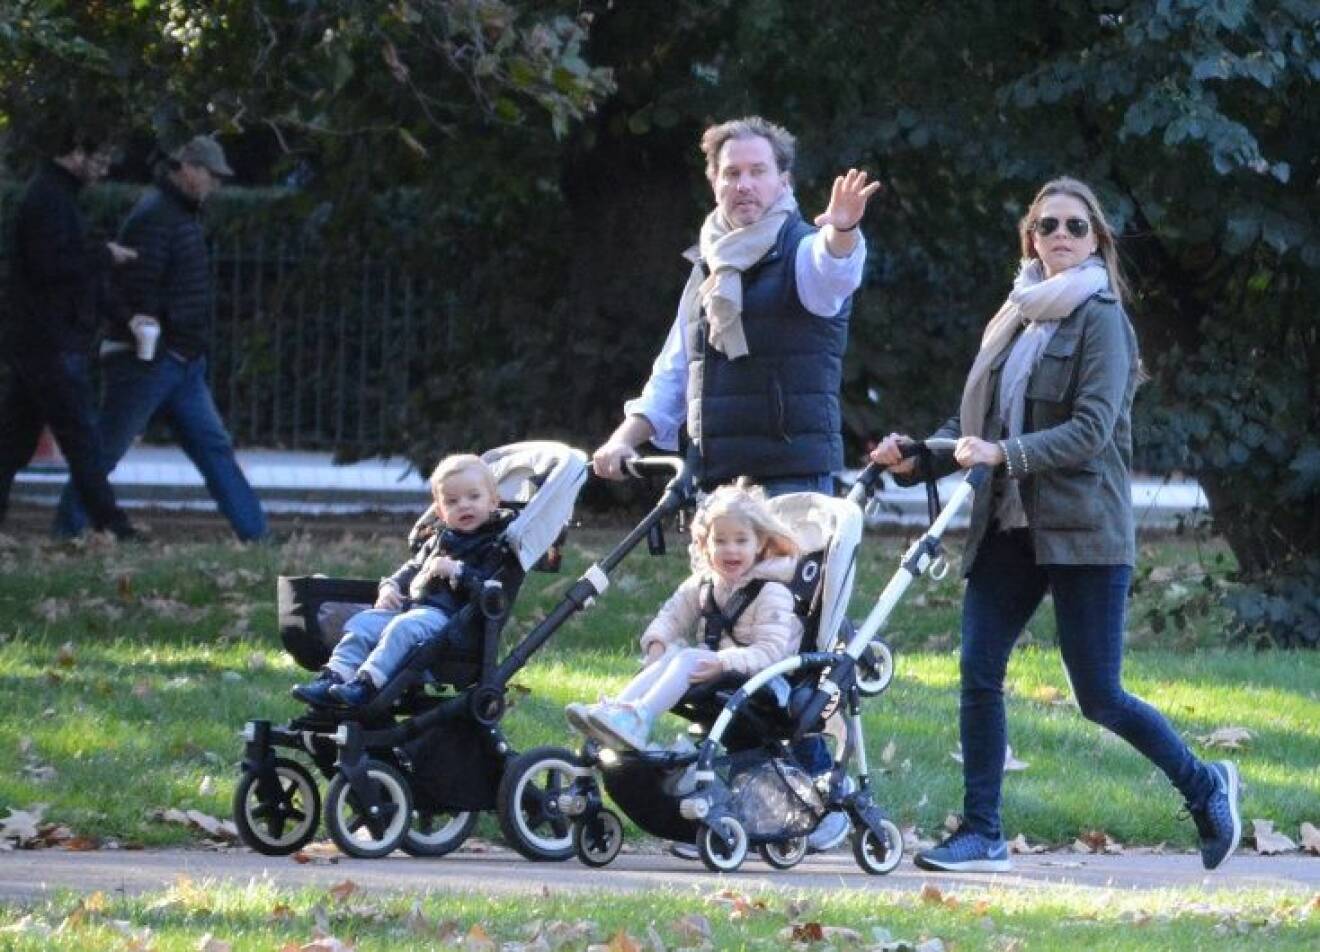 EXC - Princess Madeleine of Sweden and family spend day out at the park in London